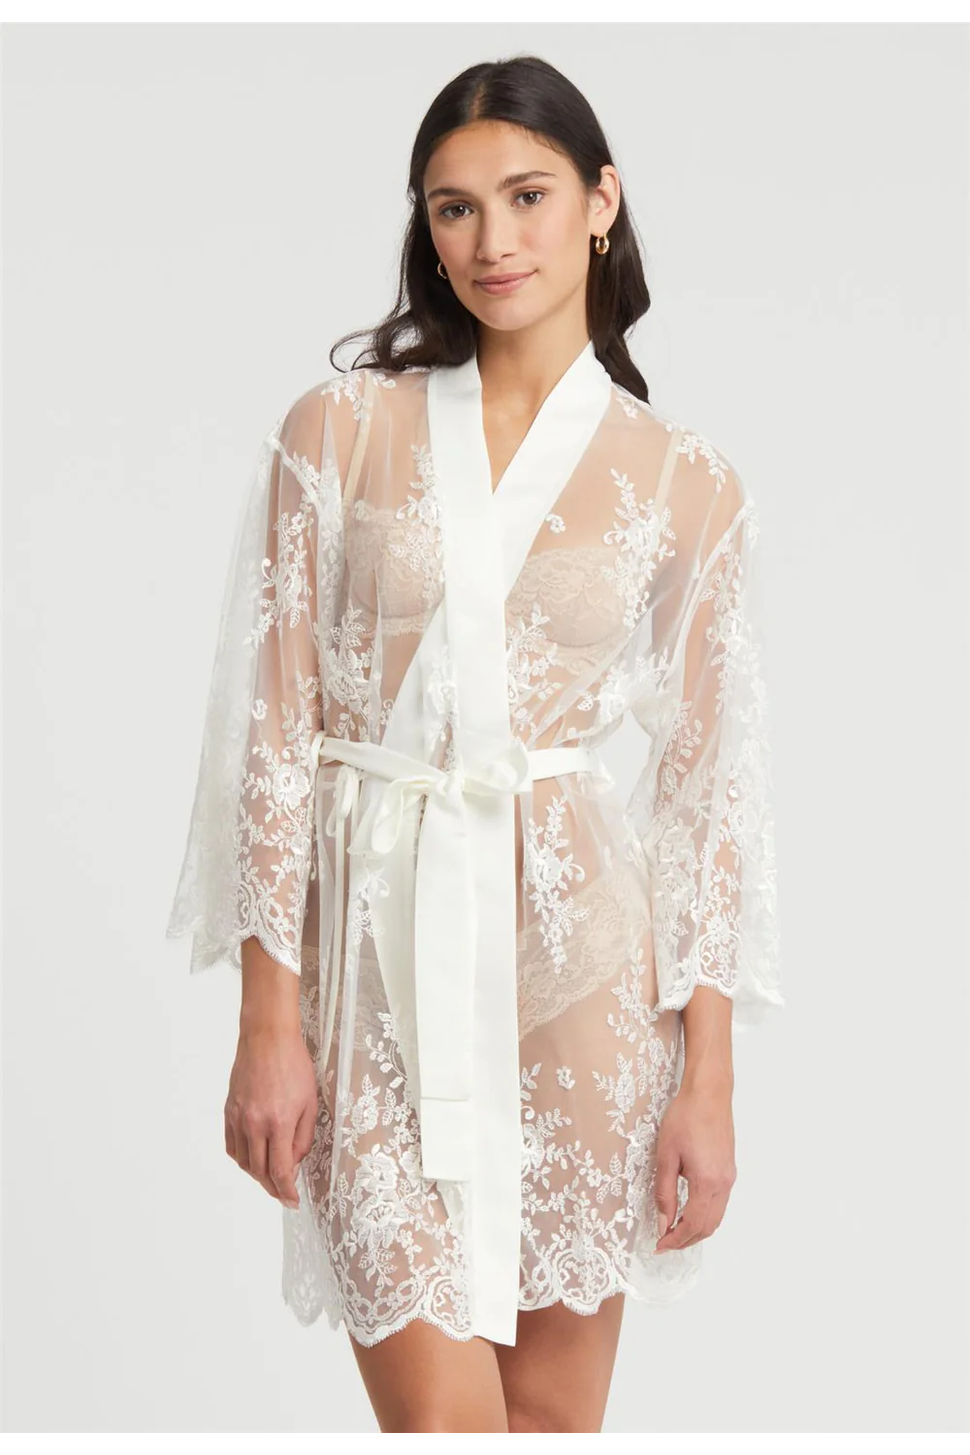 Montelle Rya Darling Cover Up - Style 197, front